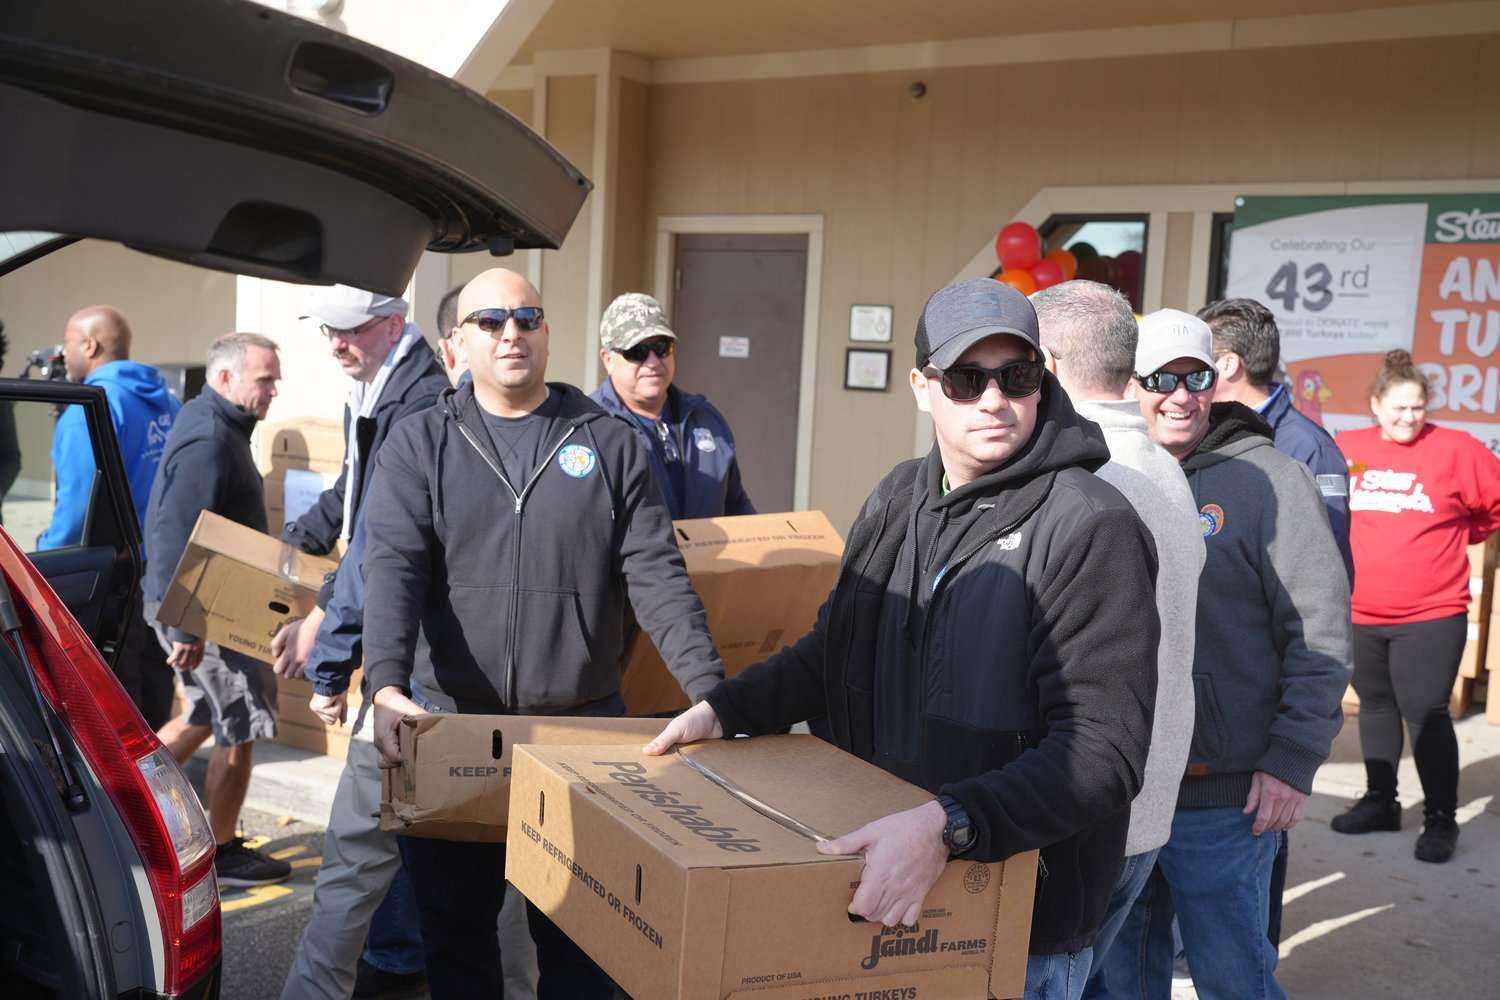 Lou Dileonardo, near right, and Michael Diclemente, far right, of the Nassau County PBA, helped pack boxes of turkeys into the vehicles of the beneficiaries.